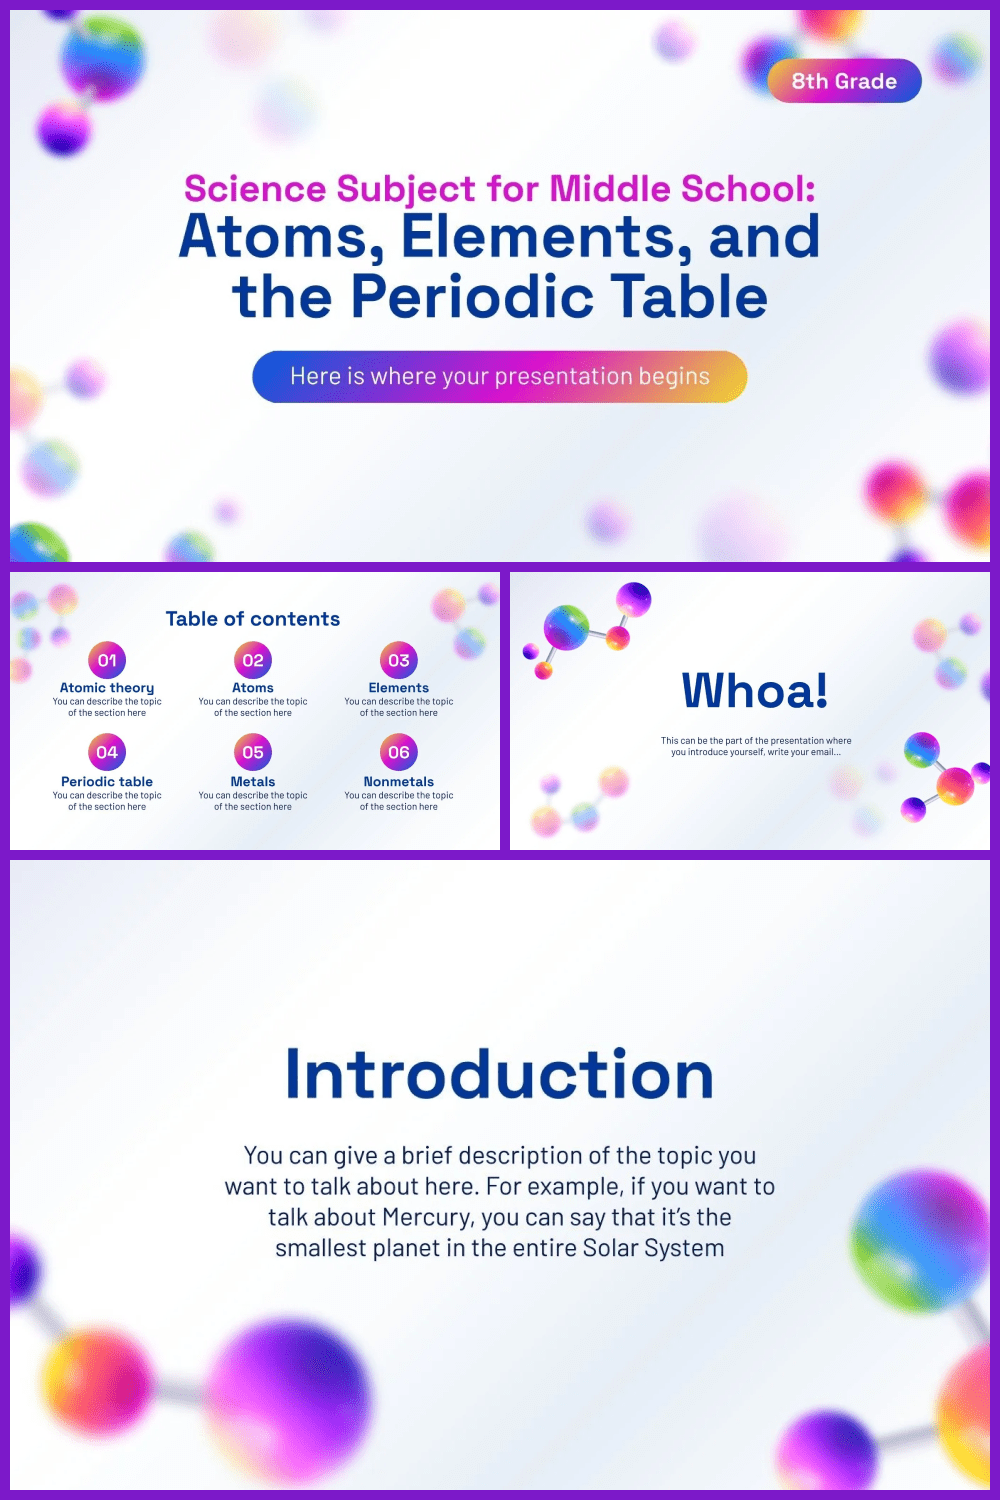 Science Subject for Middle School - 8th Grade: Atoms, Elements, and the Periodic Table.